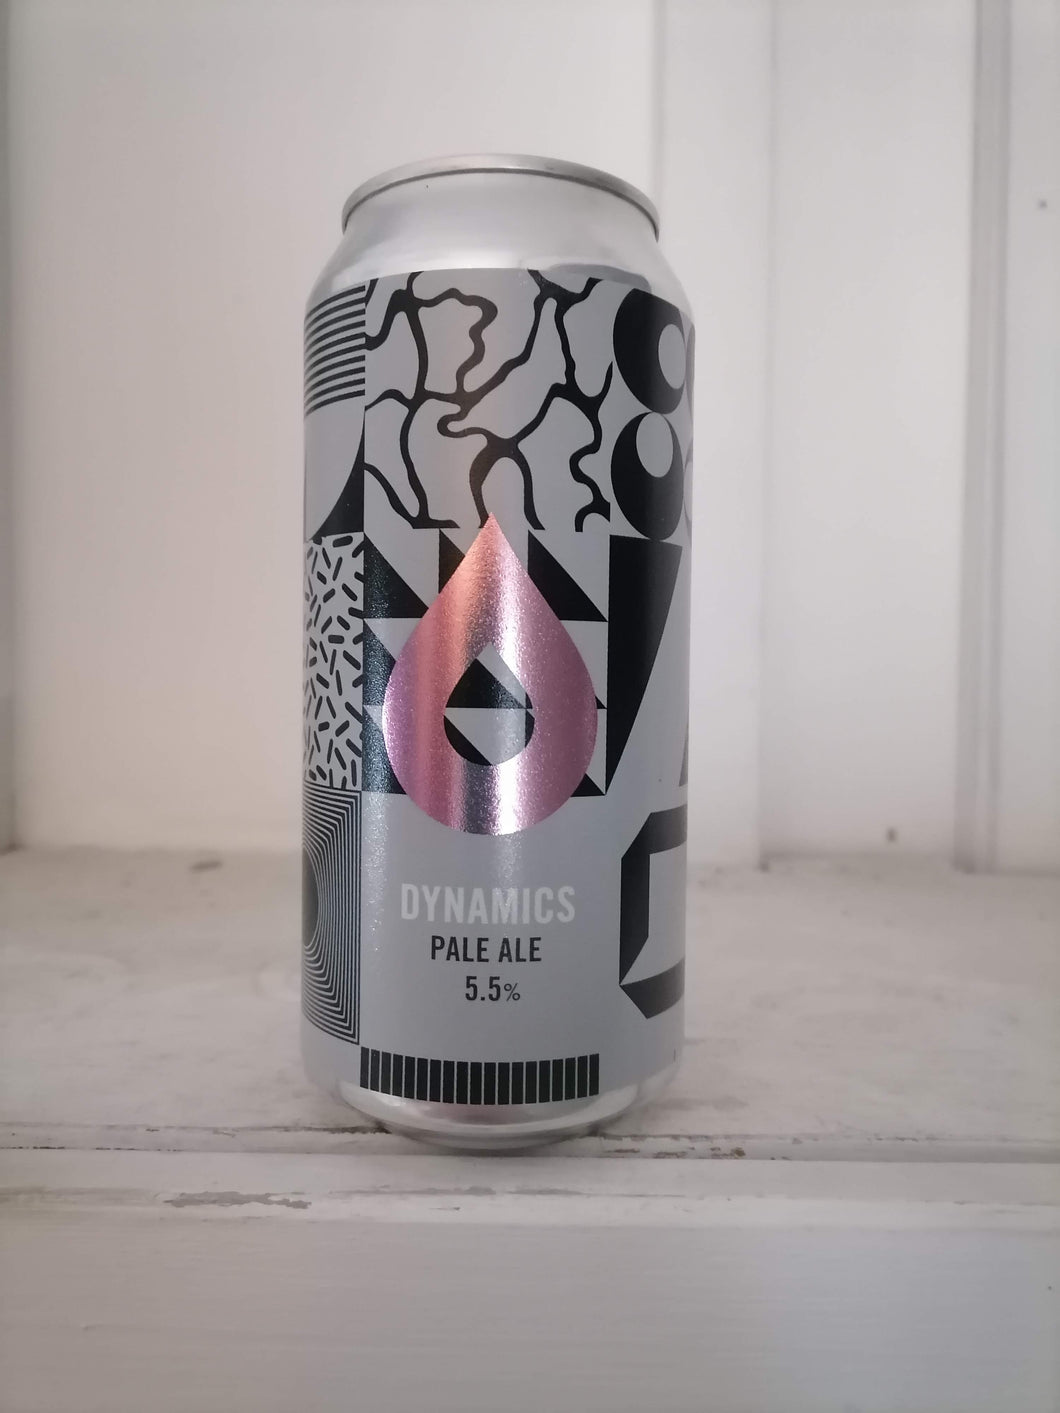 Polly's Dynamics 5.5% (440ml can)